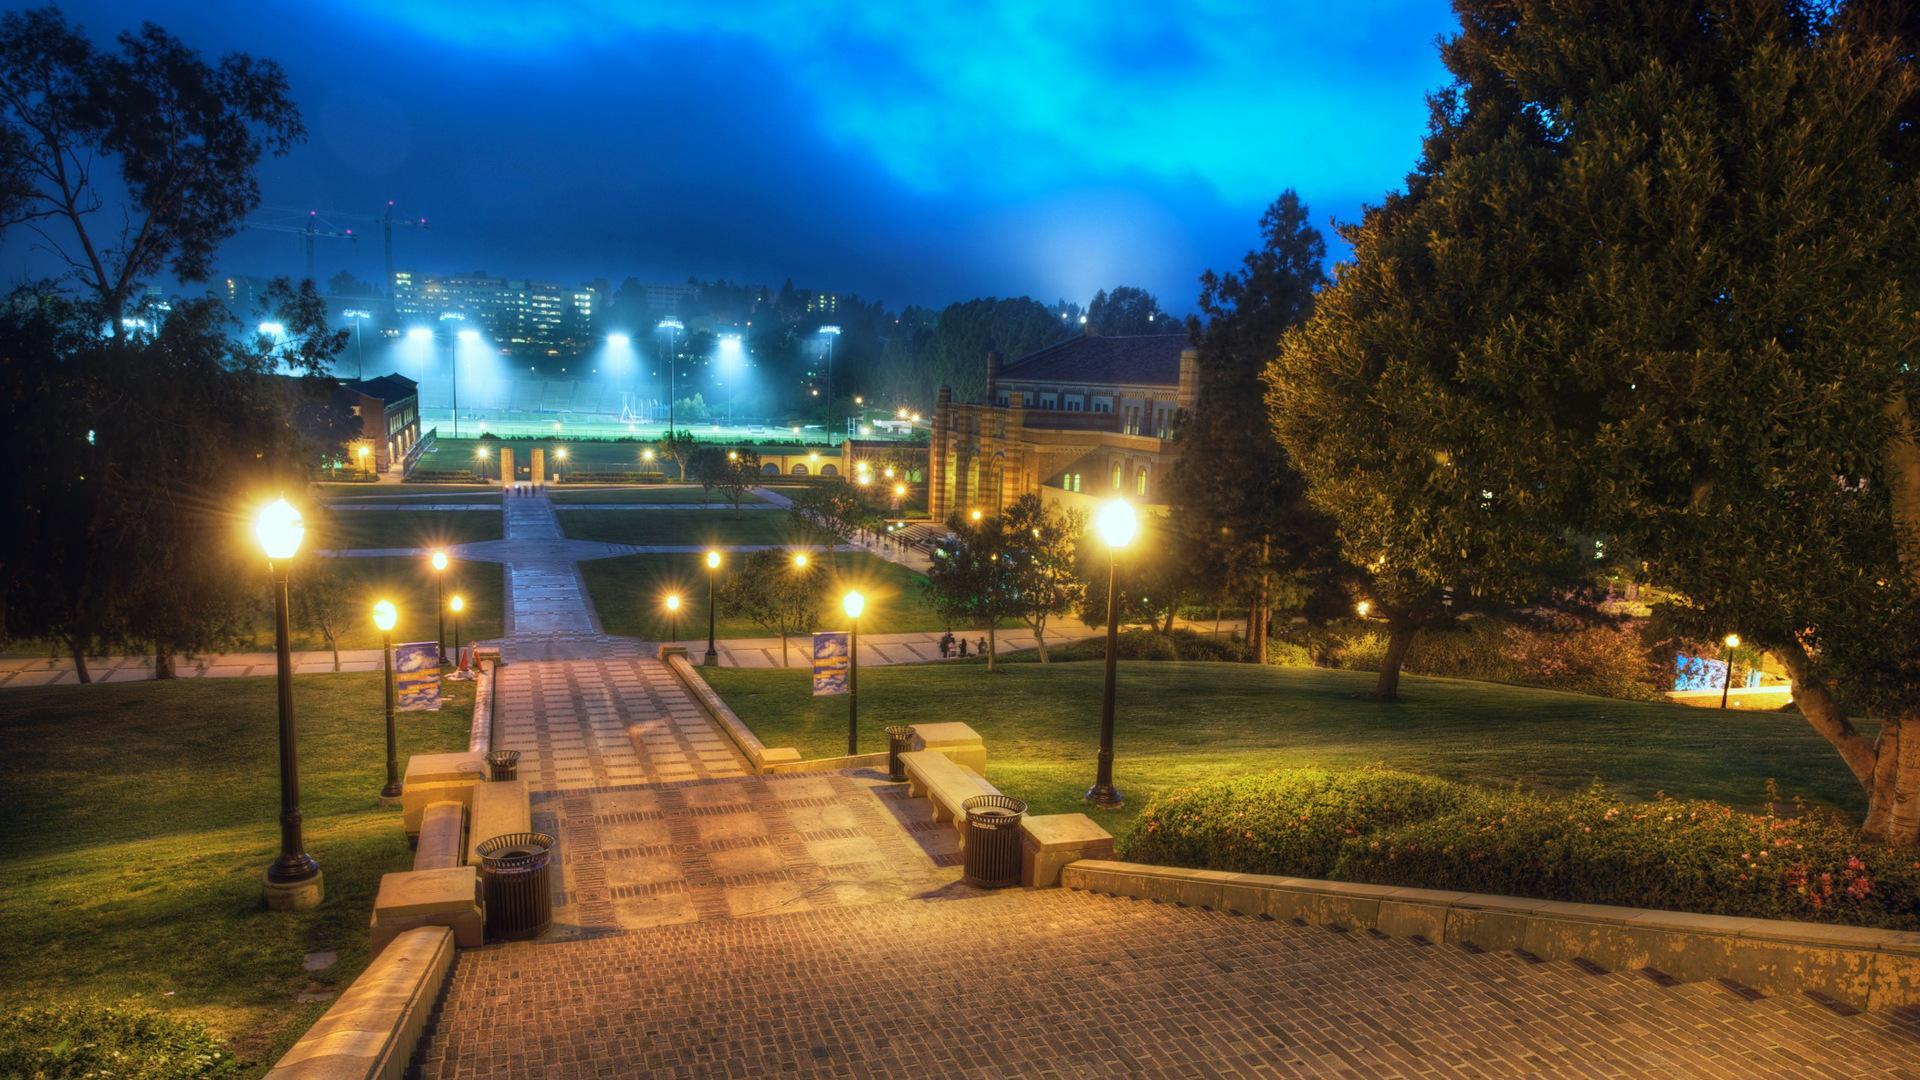 Campus Of Ucla In Westwood Los Angeles Hq Wallpaper